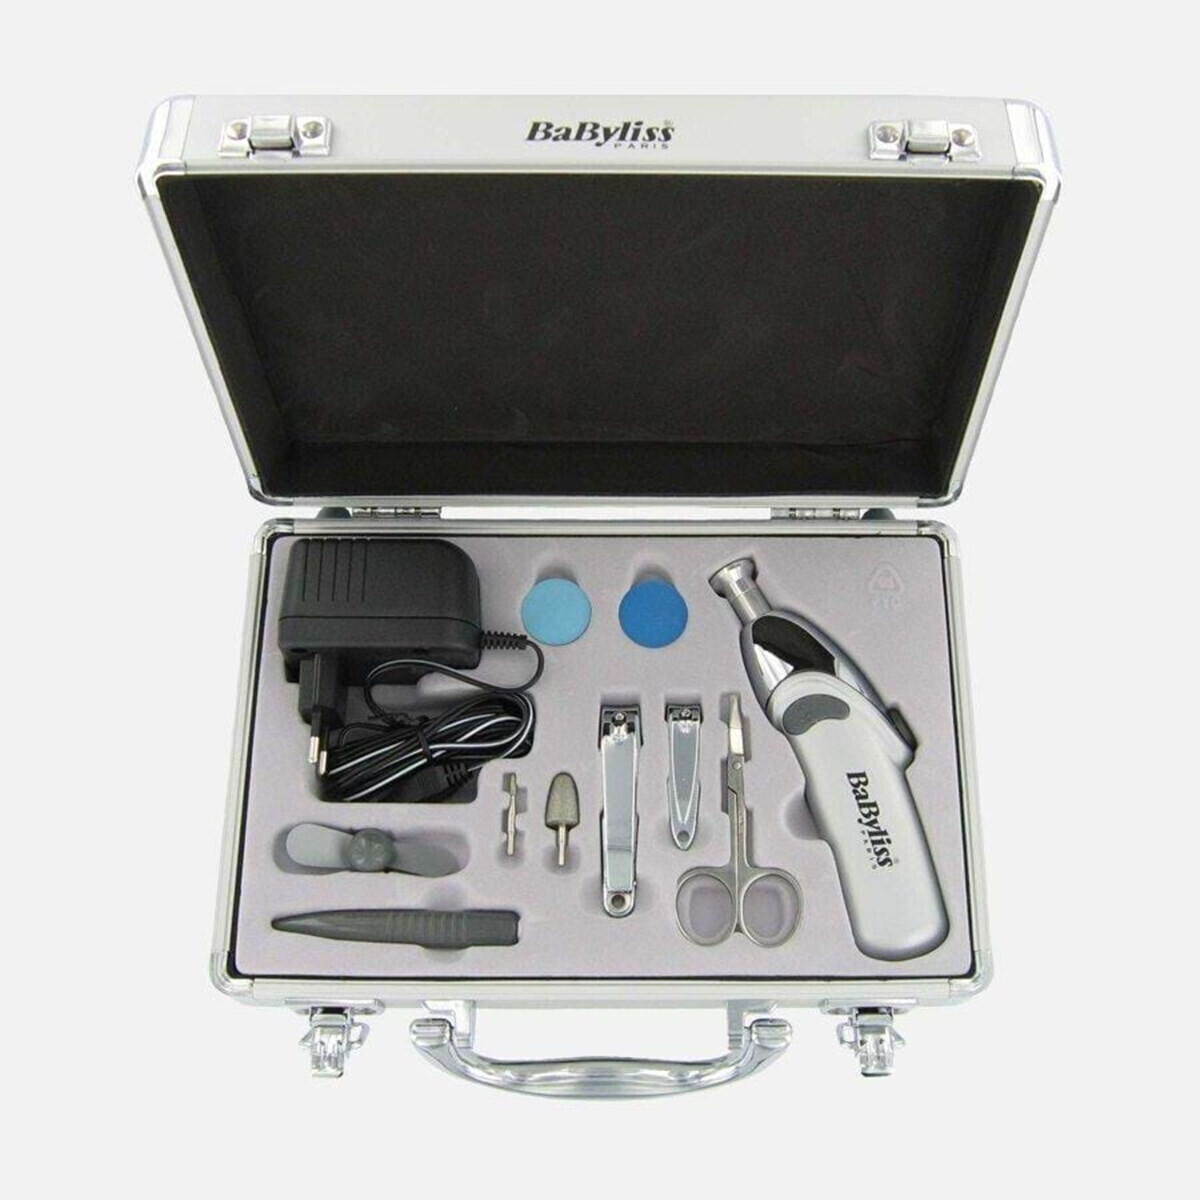 BaByliss Professional Manicure and Pedicure Set